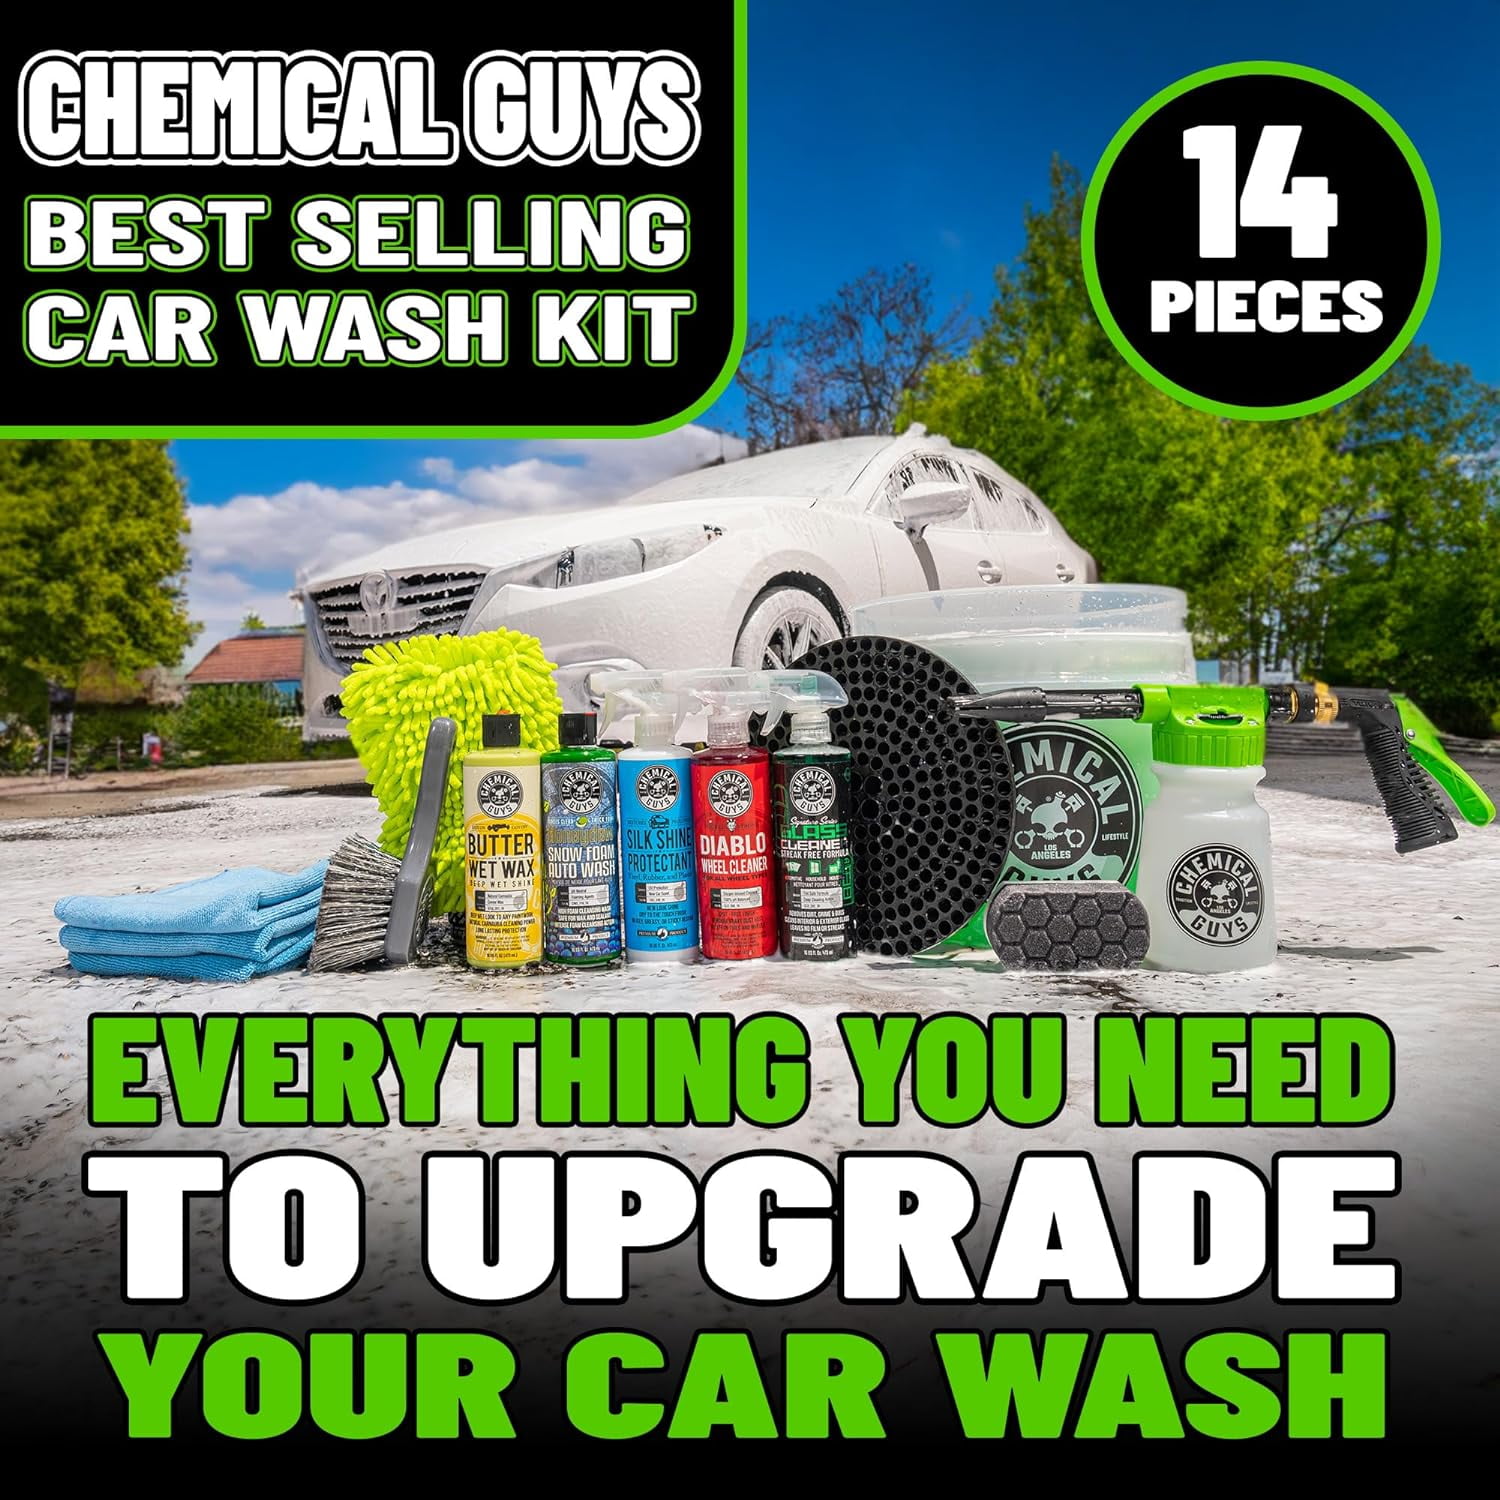  Chemical Guys HOL350PW 17-Piece Arsenal Builder Car Wash Kit  with EQP408 ProFlow Performance Electric Pressure Washer, Foam Cannon,  Storage/Carry Bag and (6) 16 fl oz Car Care Cleaning Chemicals : Patio